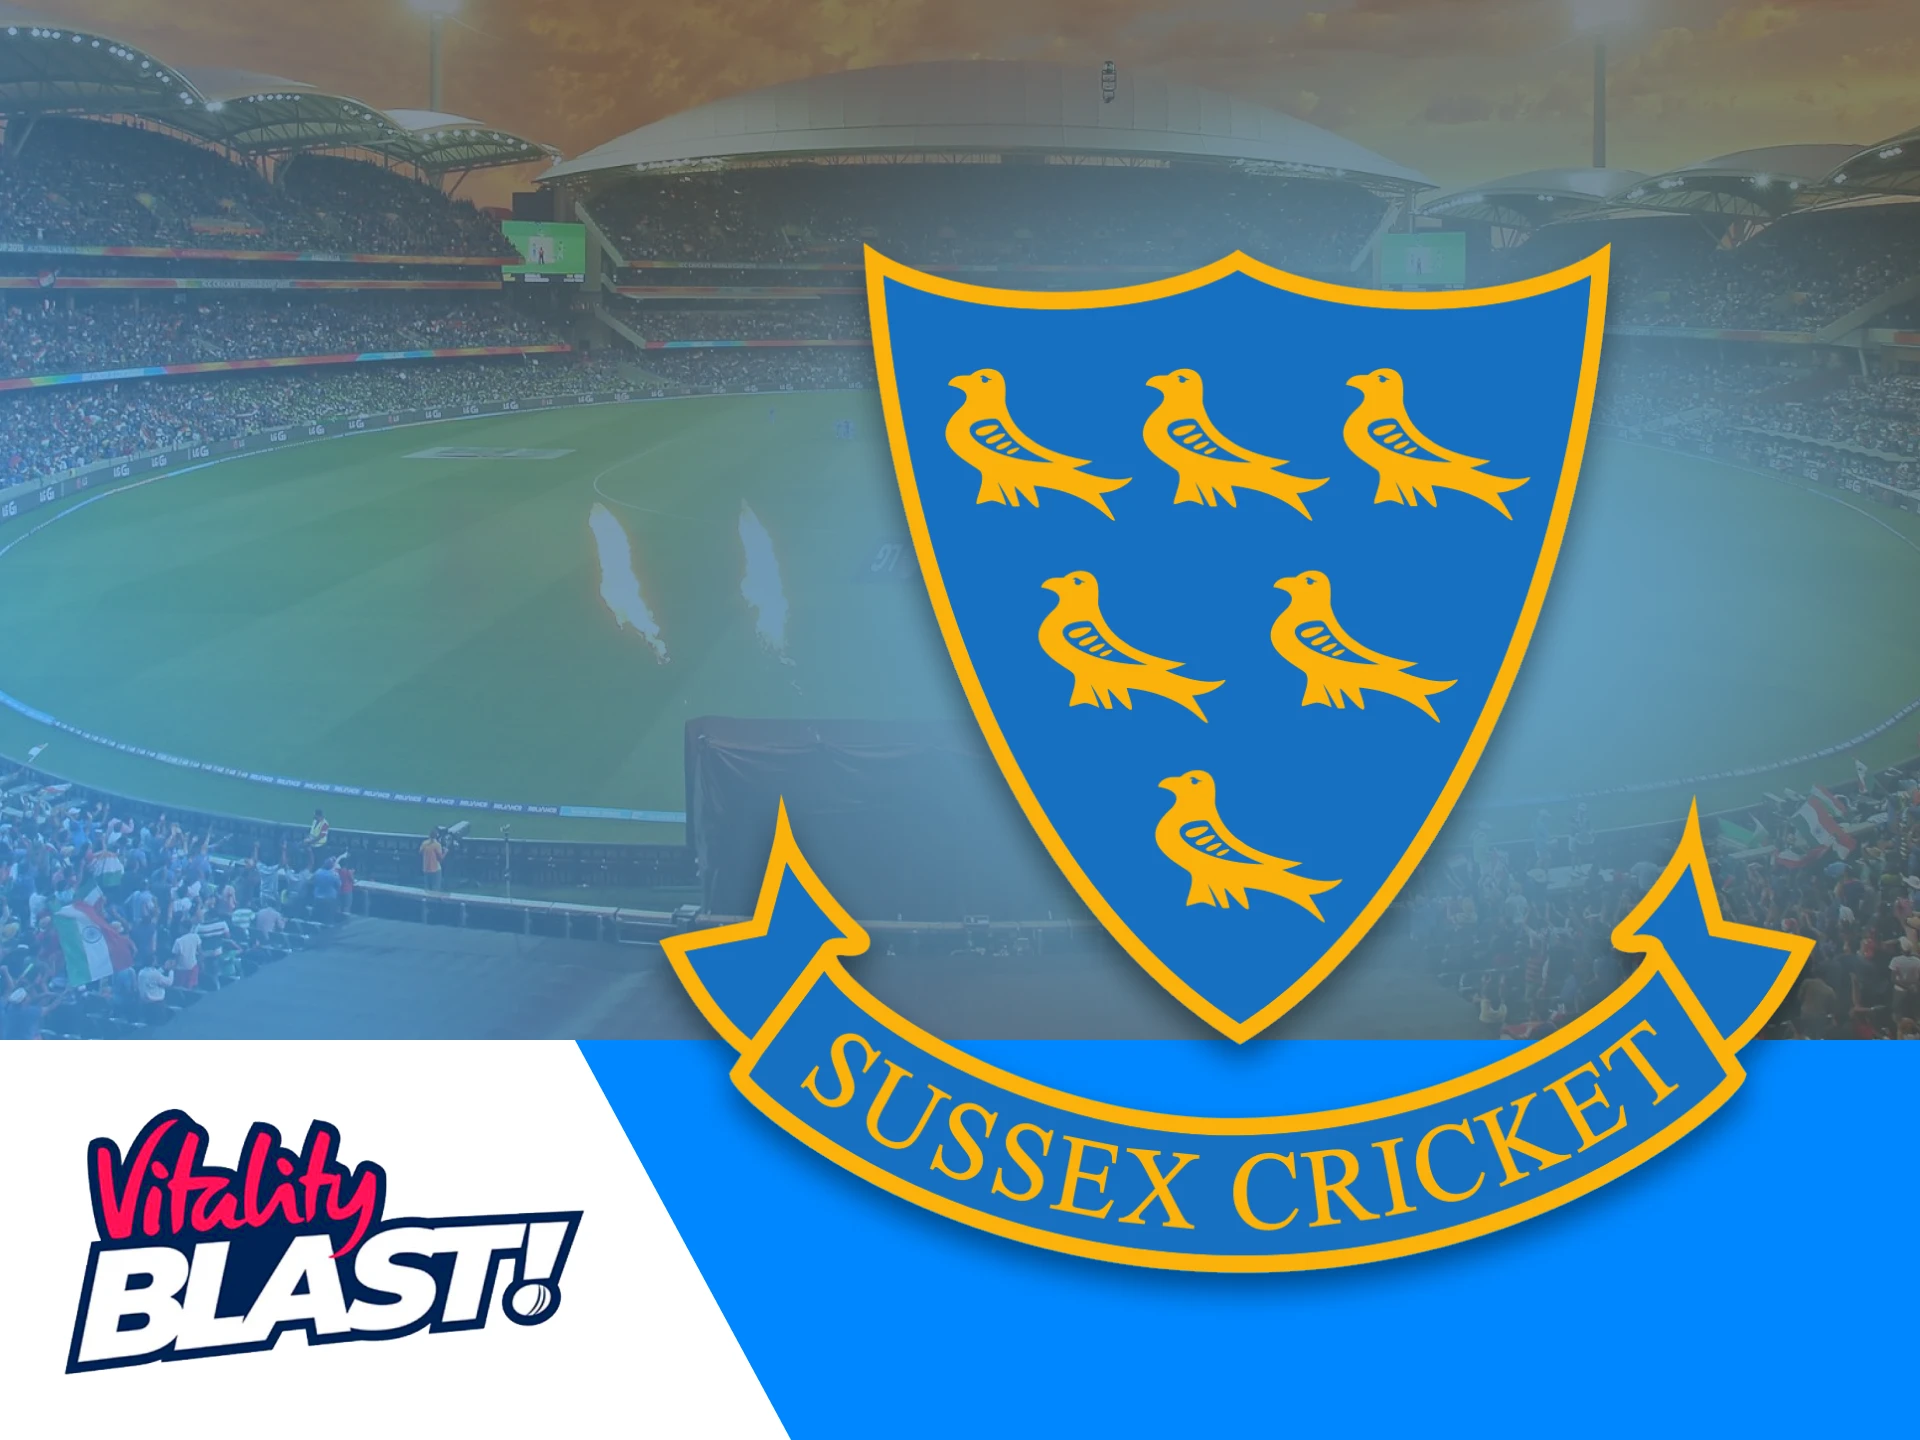 The Sussex team participates in each of England's premier domestic cricket tournaments.